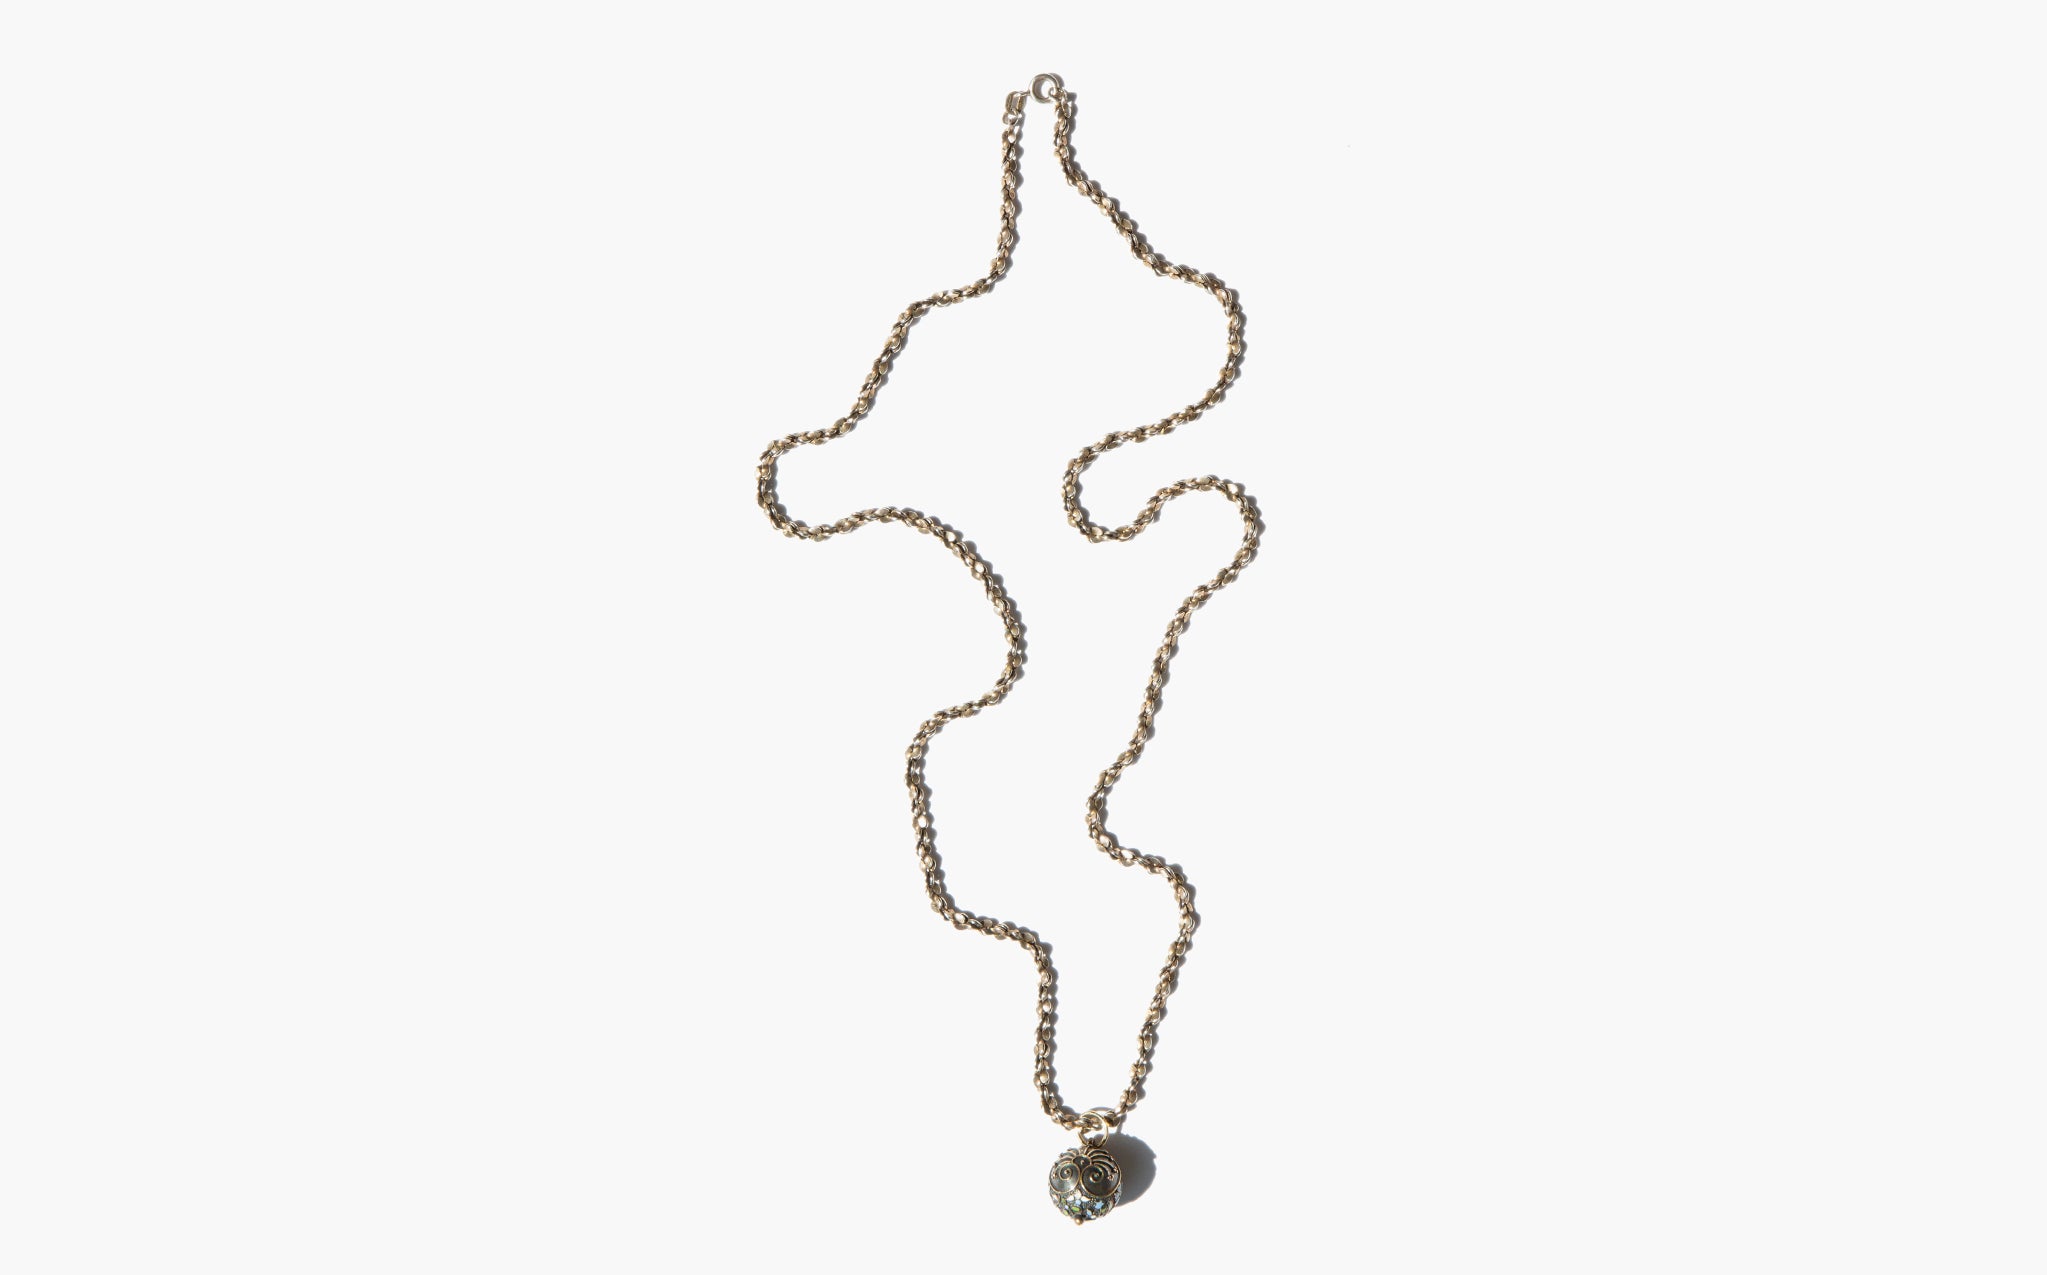 Clementina Necklace